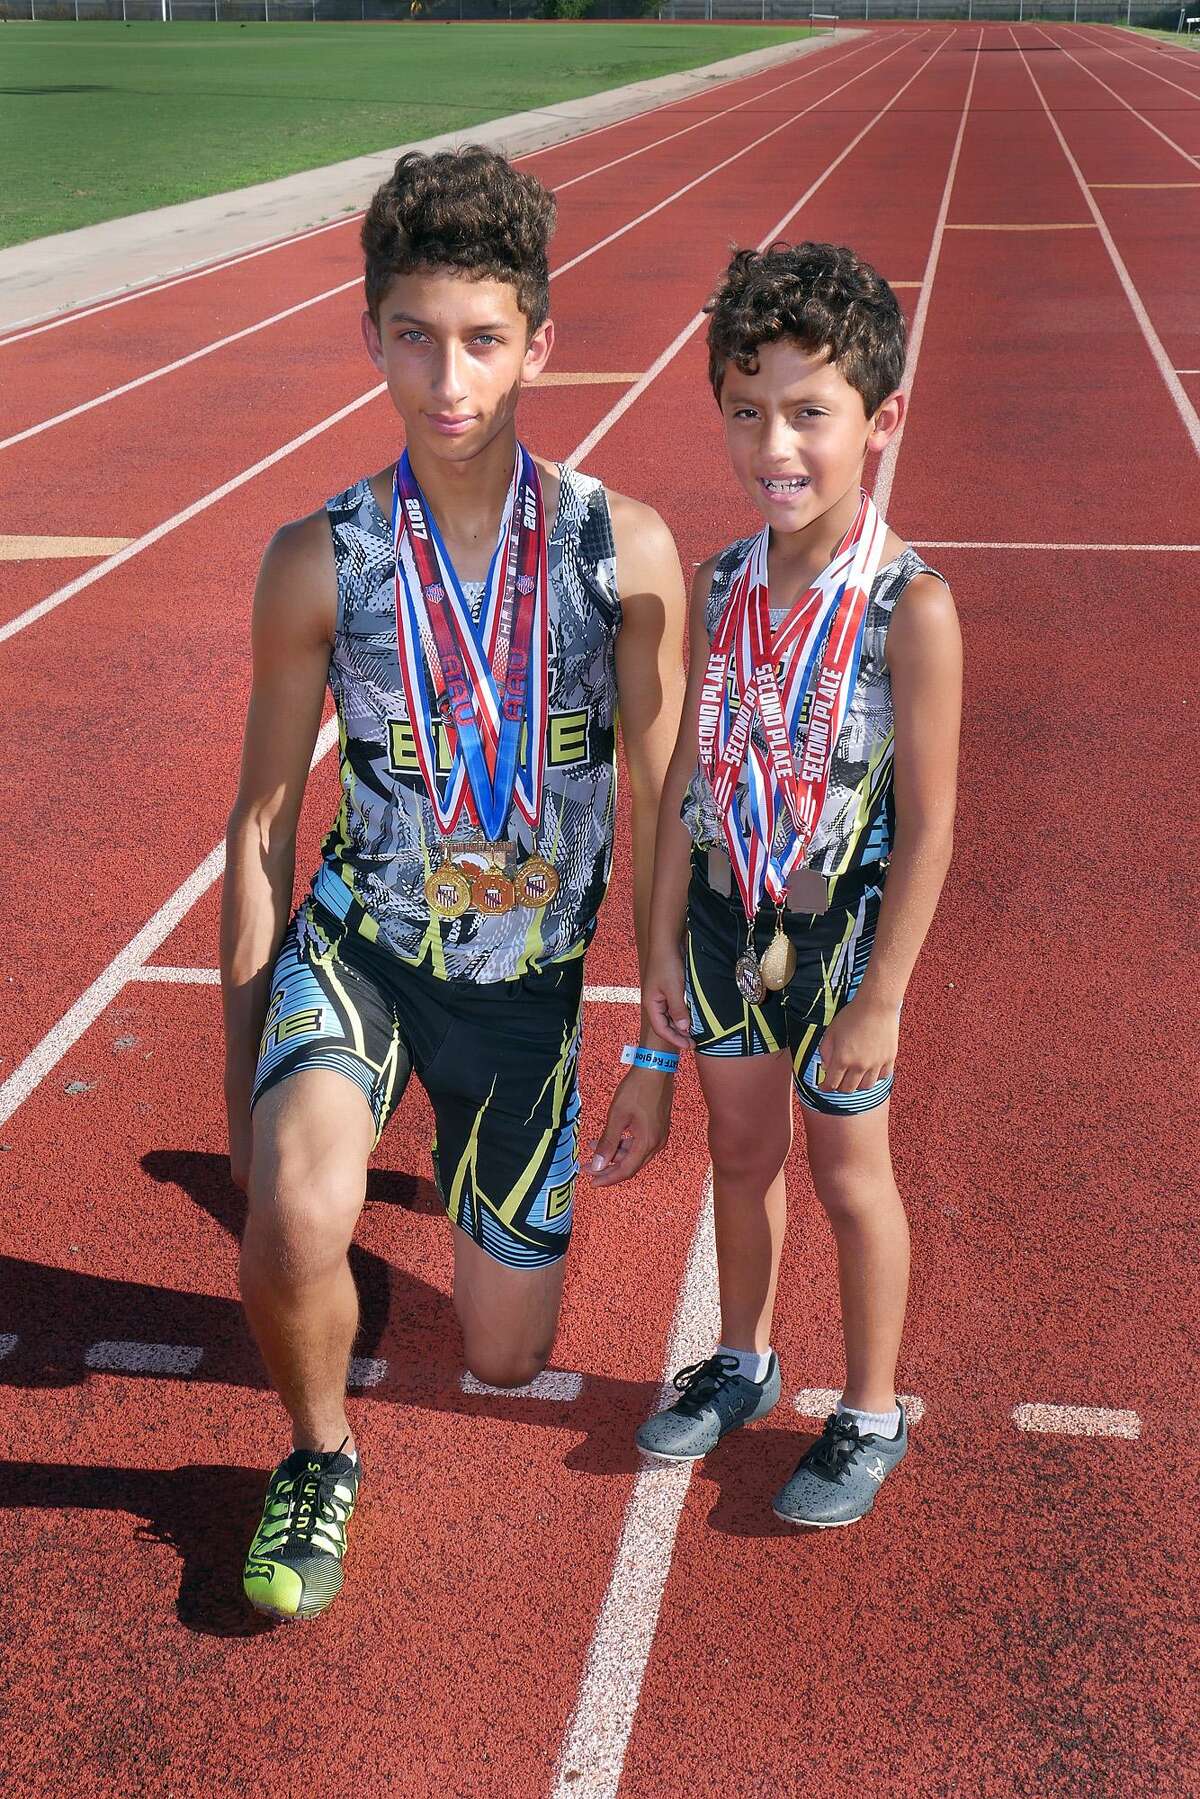 BC Elite athletes and brothers D’Carlo and Levi Calderon are competing at the USTF Hershey National Junior Olympics Track and Field Championships in Lawrence, Kansas.